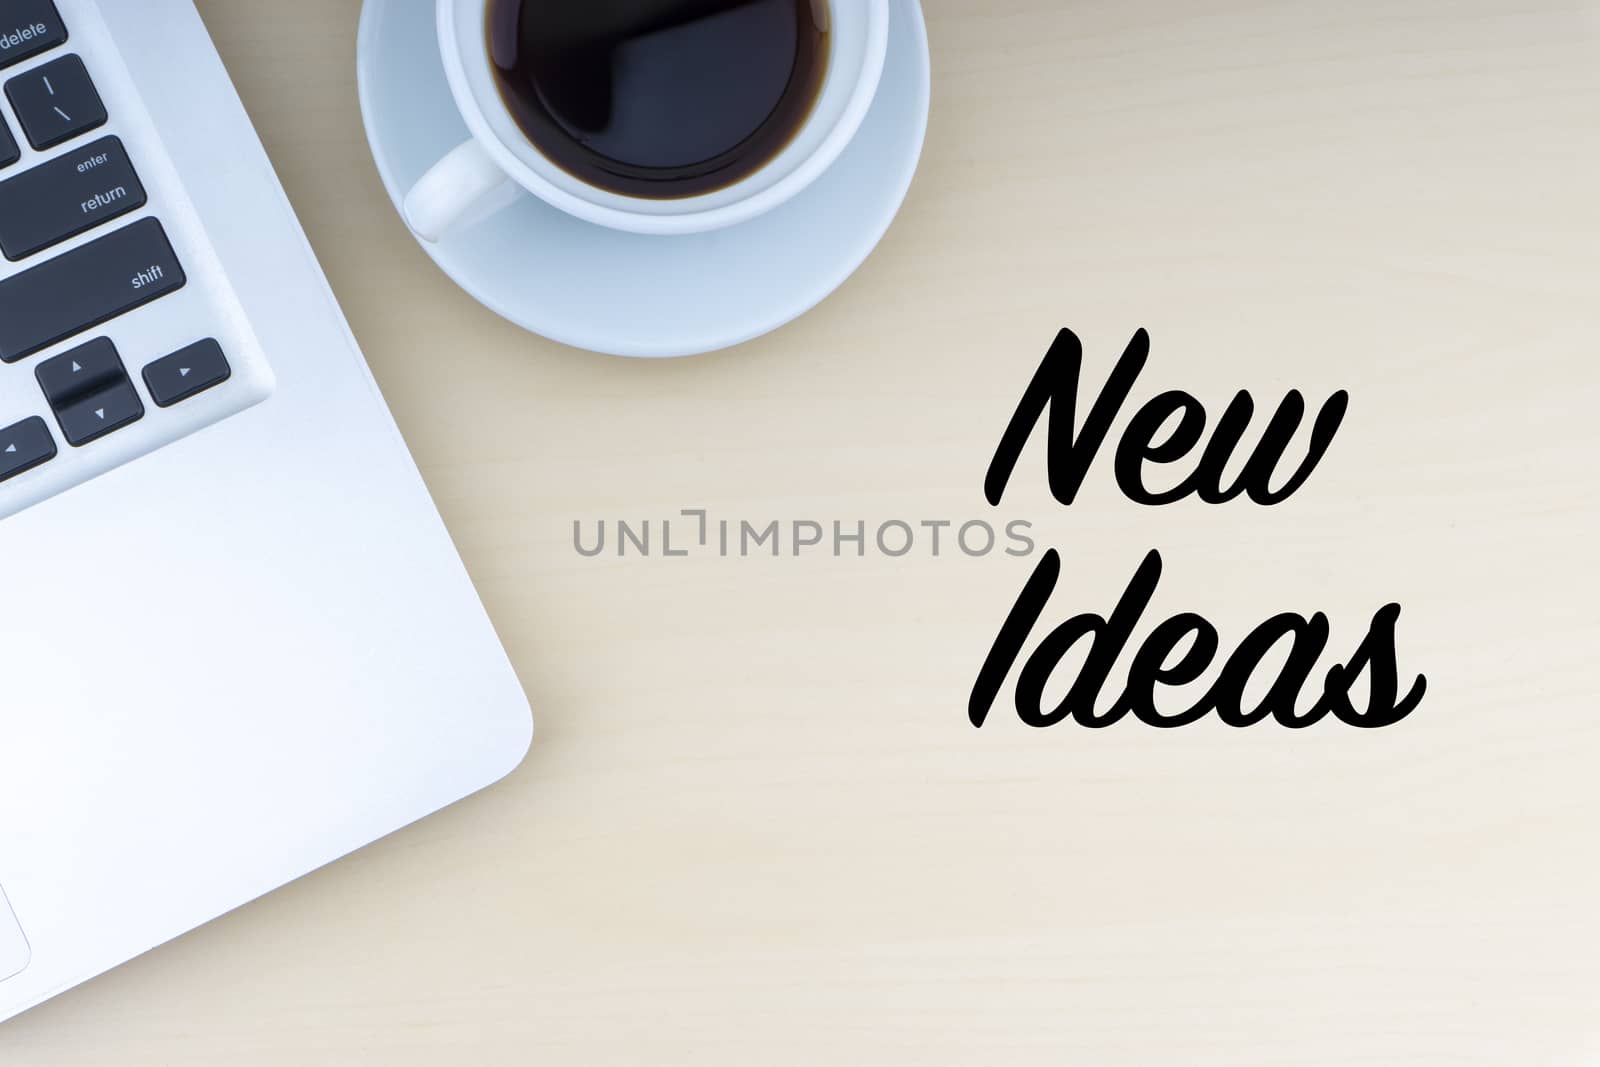 NEW IDEAS text with laptop and cup of coffee on wooden background by silverwings